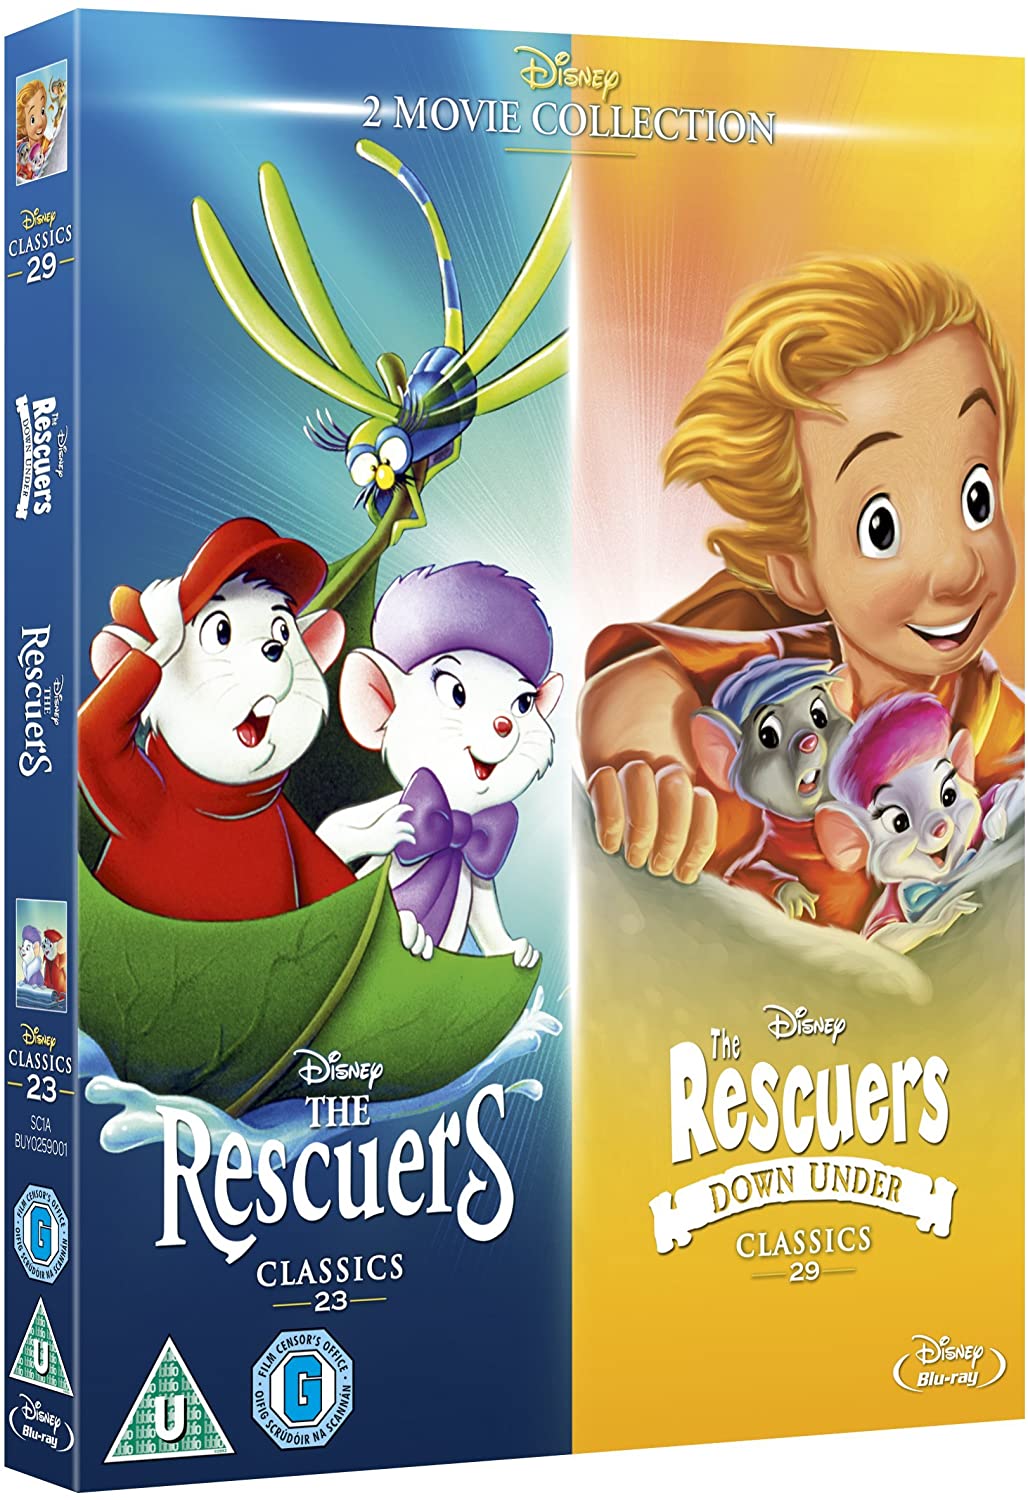 Rescuers & Rescuers Down Under - Animation [DVD]